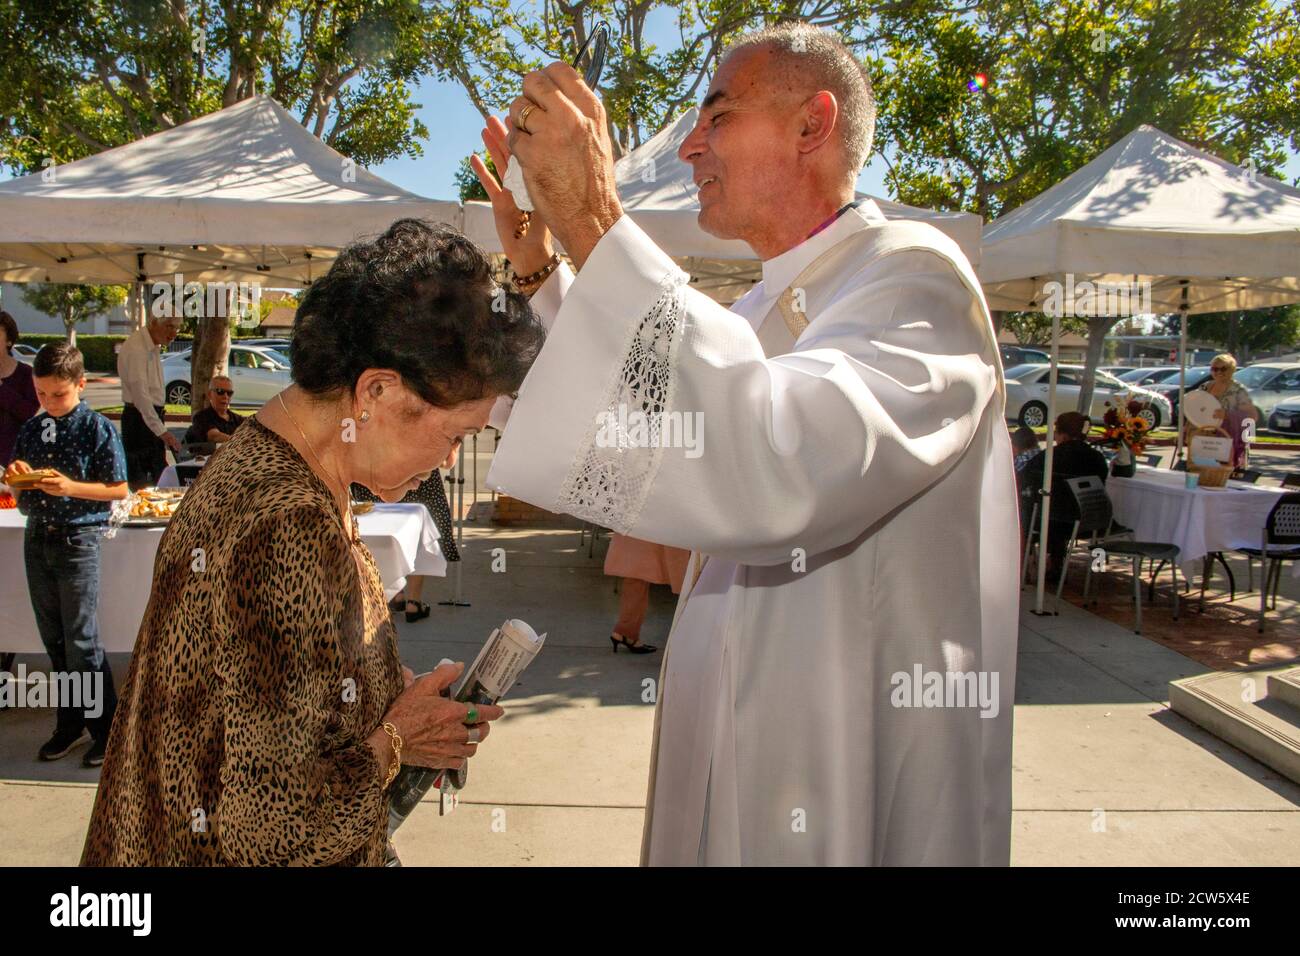 After mass, the deacon of a Southern California Catholic church gives his blessing to an Asian American parishioner in the church outdoor yard. Stock Photo